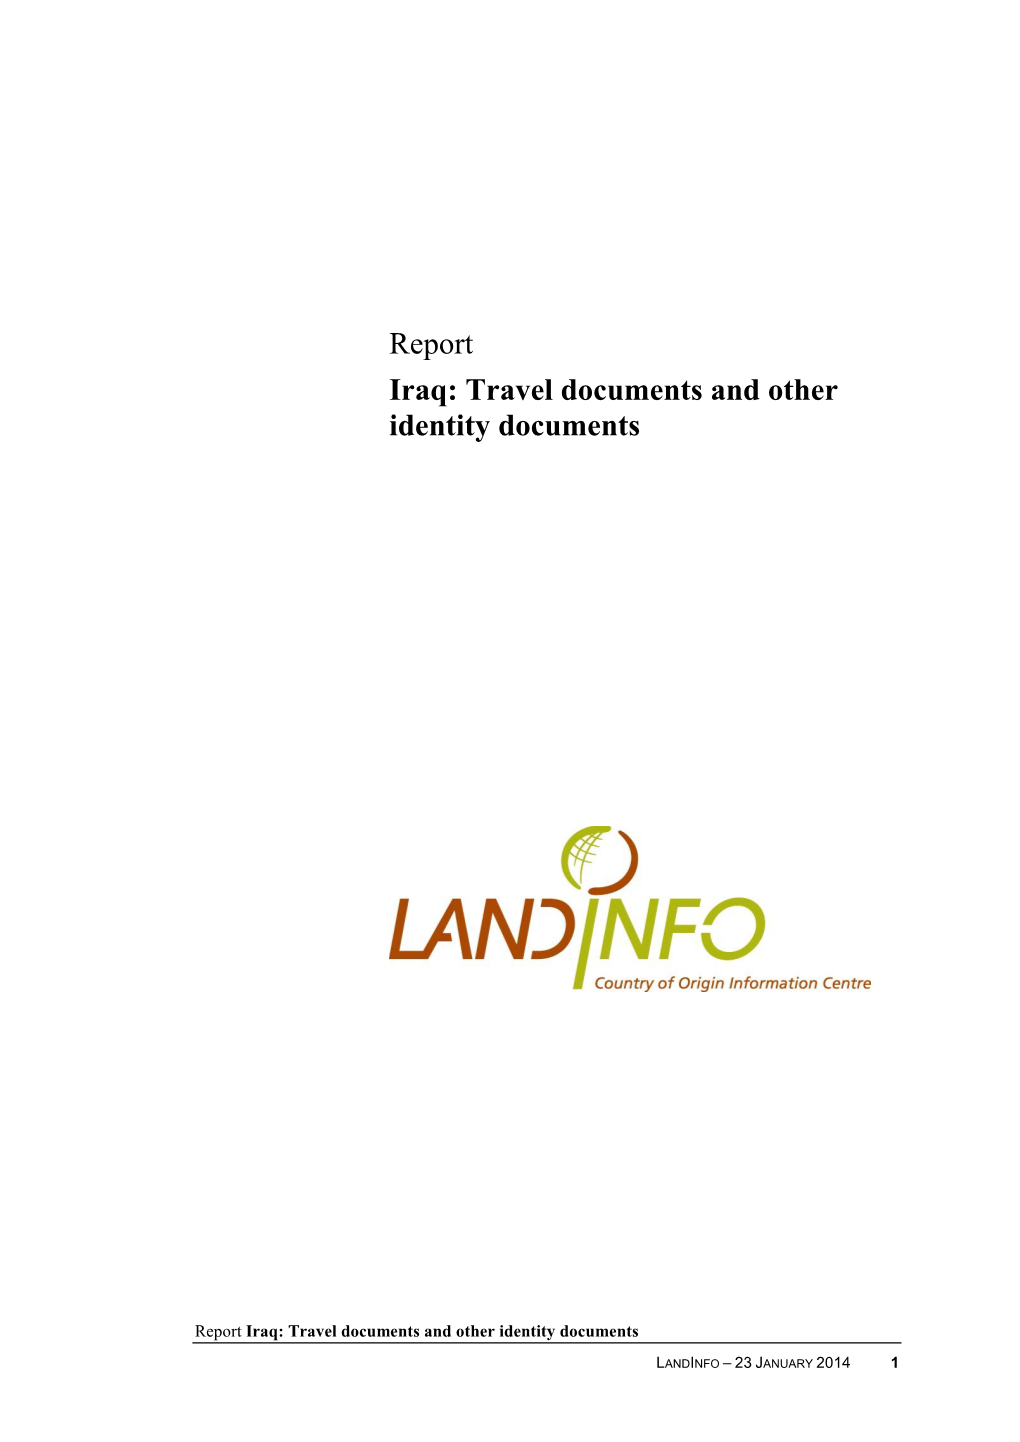 Report Iraq: Travel Documents and Other Identity Documents